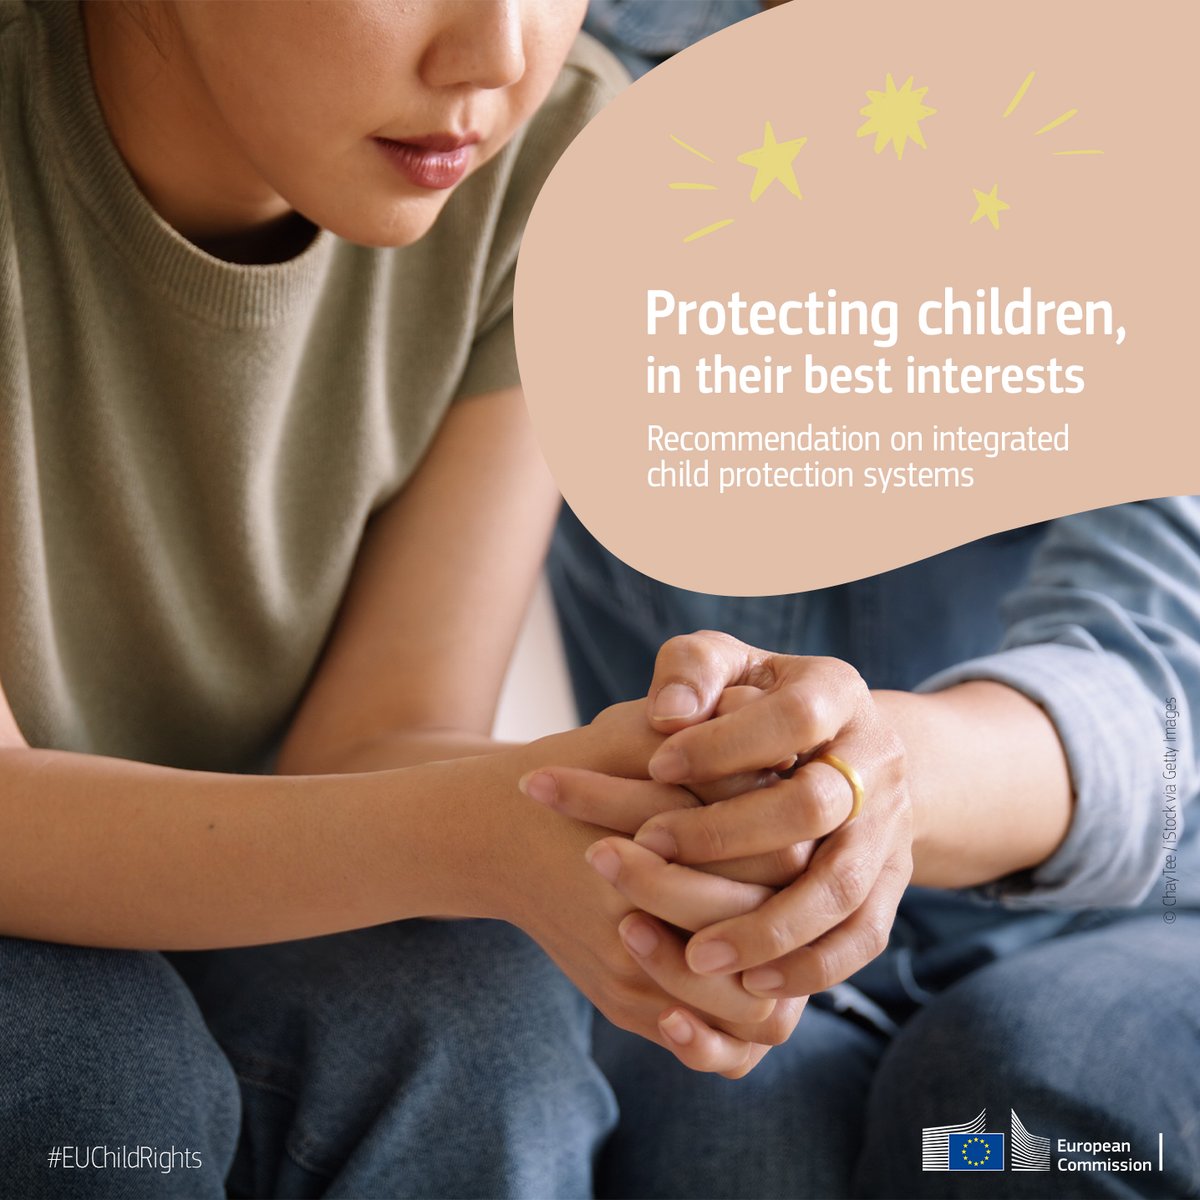 Protecting #EUChildRights requires effort on all levels. The Recommendation urges: ➡️Improve coordination at all levels, starting close to children ➡️Foster societal responsibility to protect children ➡️Protect children also in 🇪🇺 external actions More: europa.eu/!jBDc9f